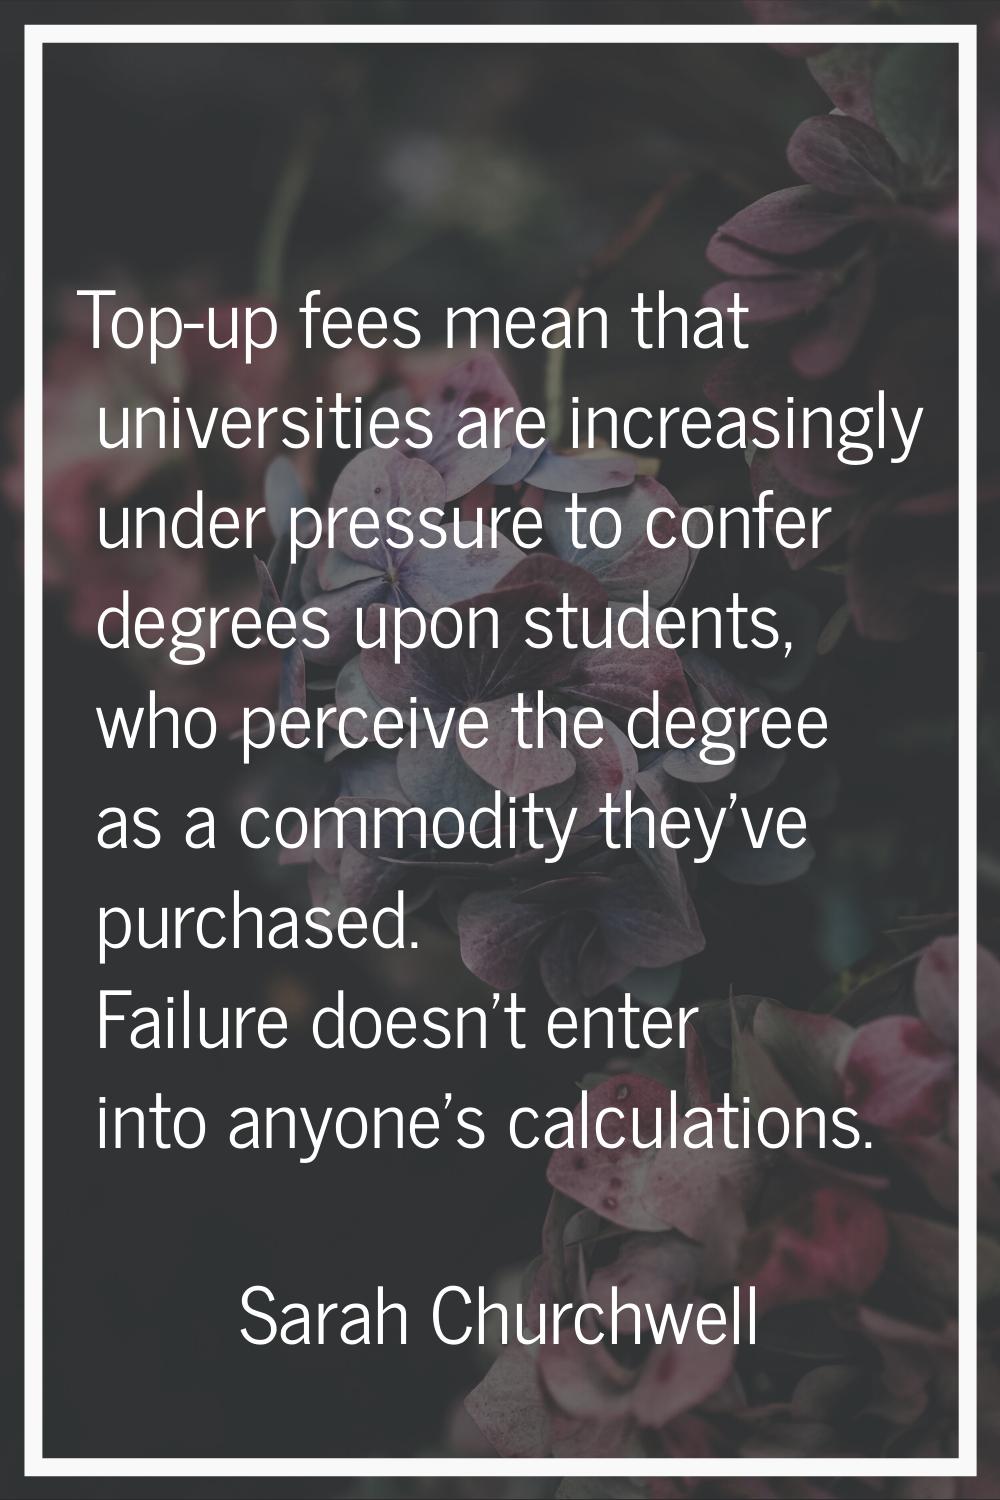 Top-up fees mean that universities are increasingly under pressure to confer degrees upon students,